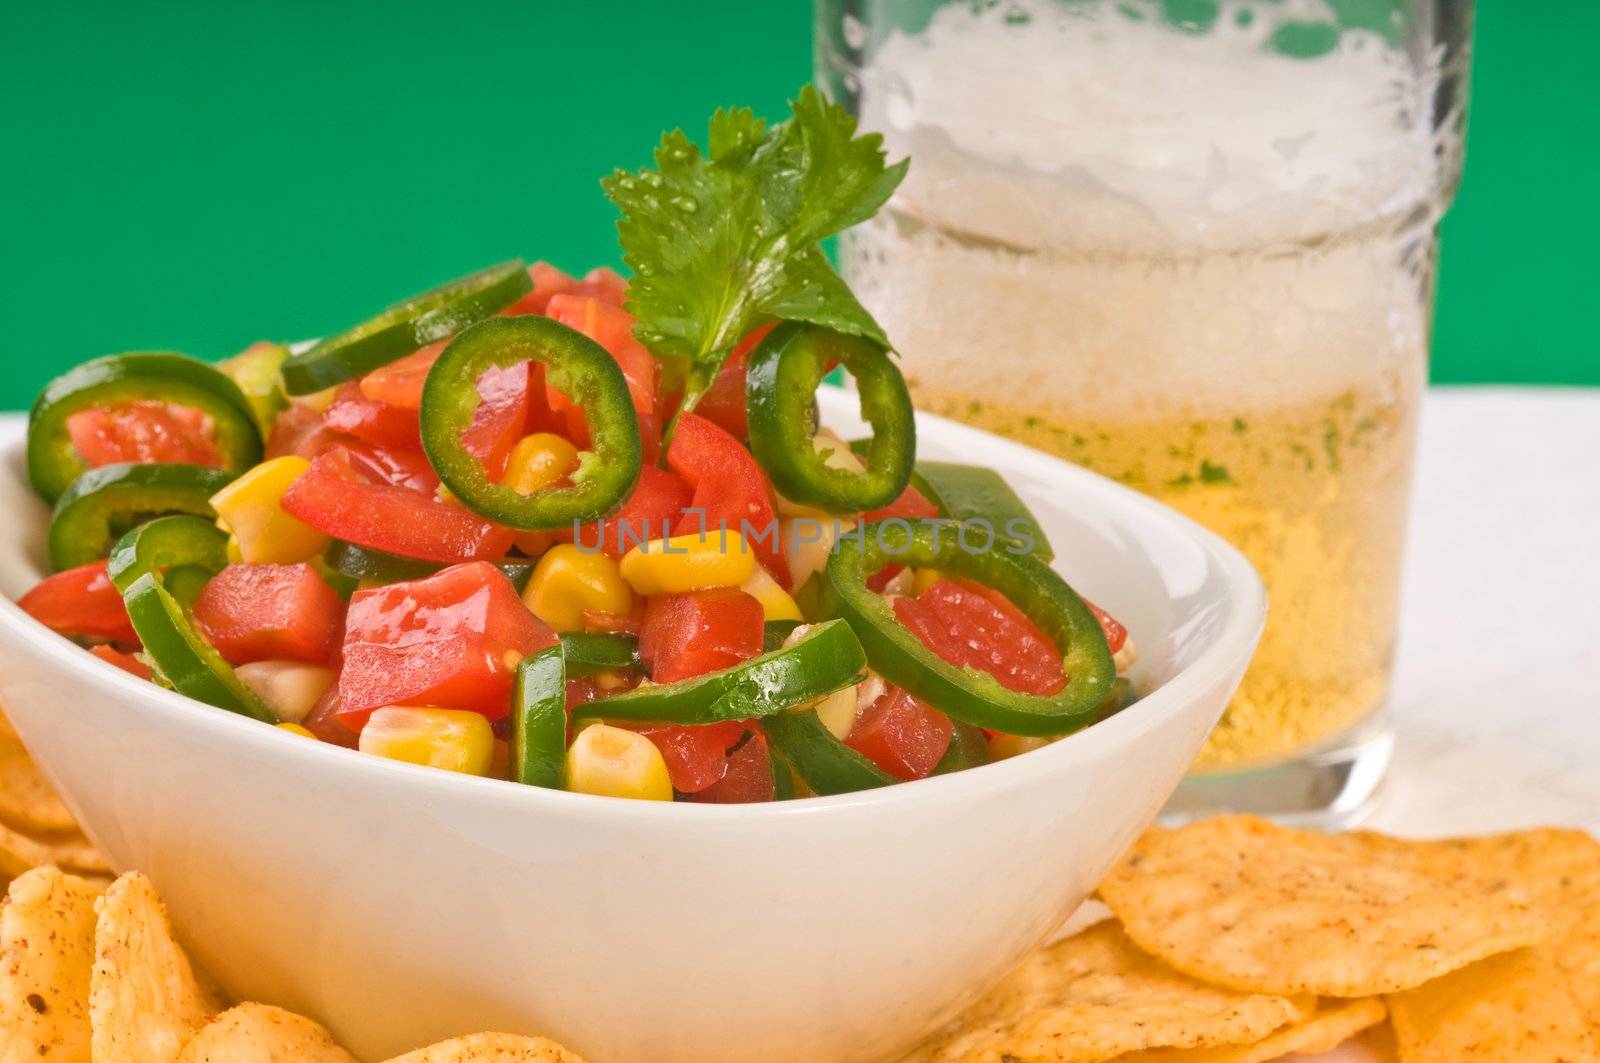 Delicious snack or homemade salsa and cold beer.